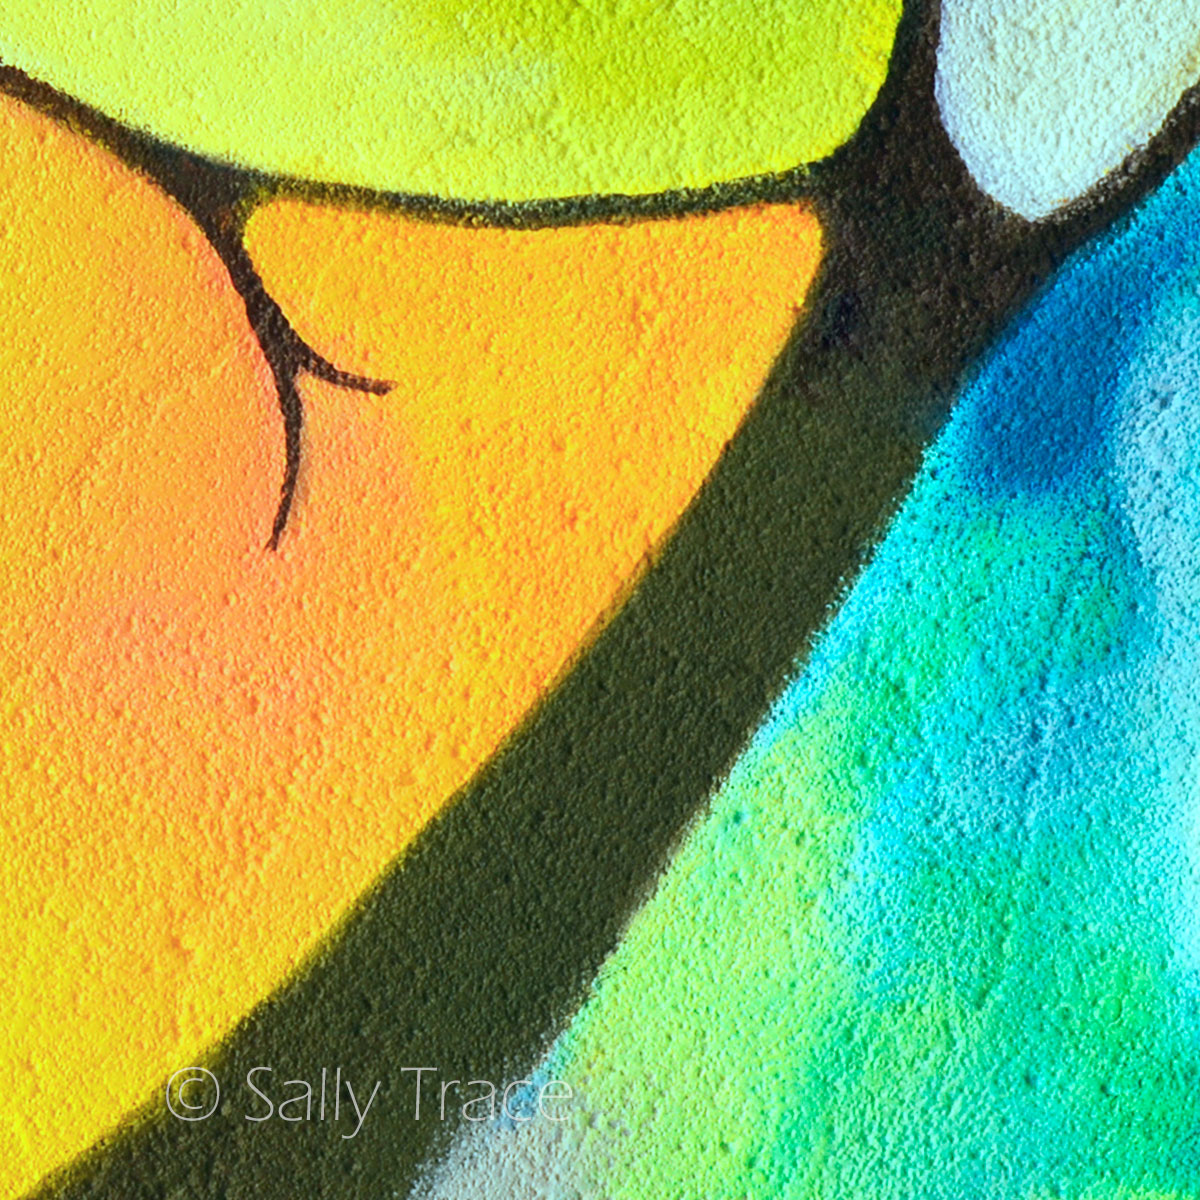 Geometric art prints from the original painting by Sally Trace, art prints on canvas, buy art directly from the artist, close-up view